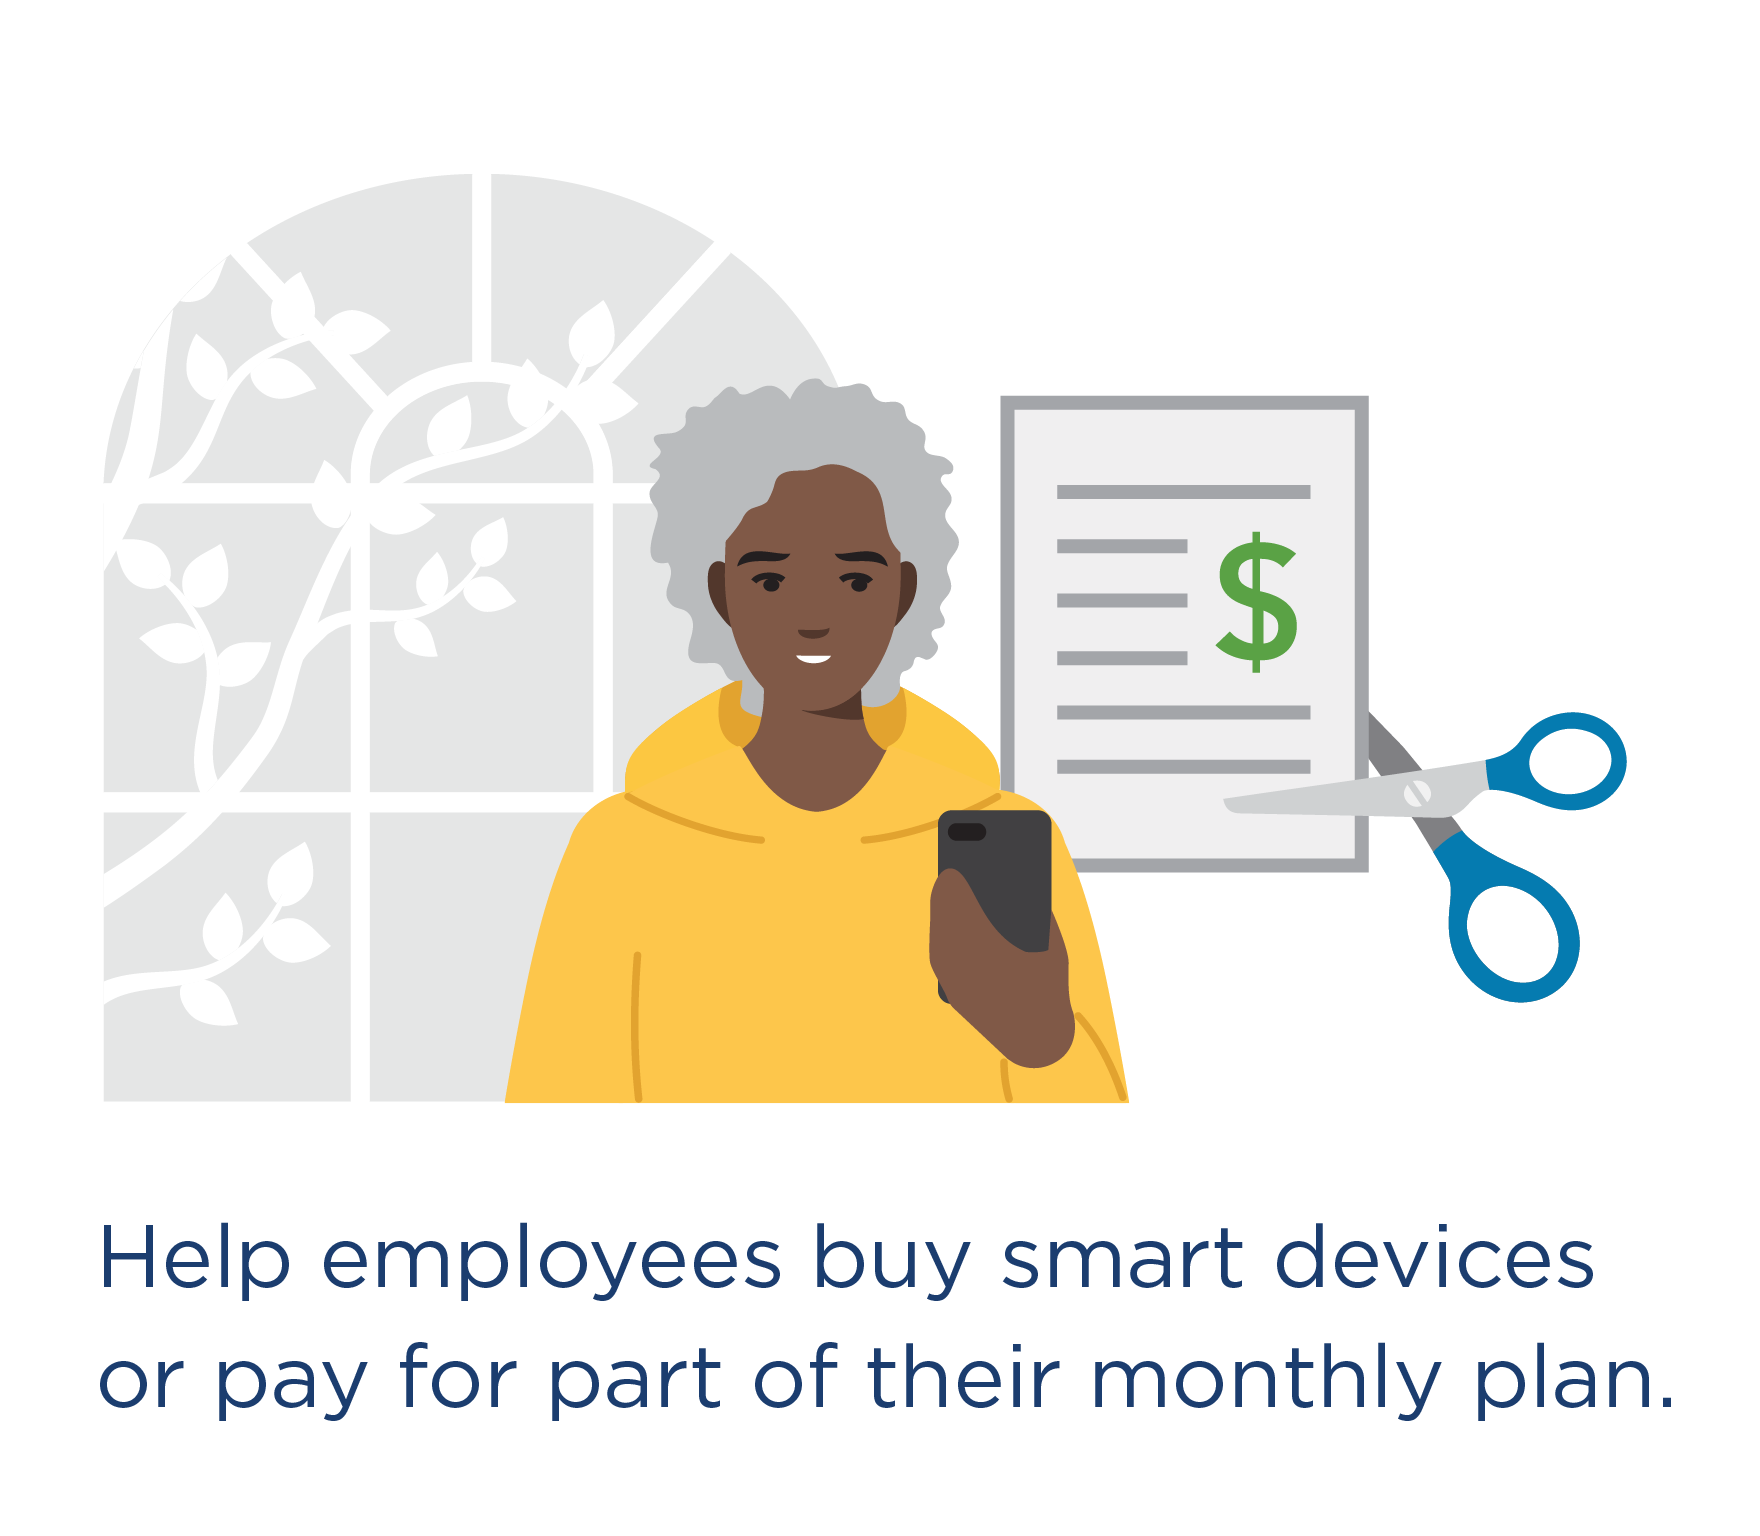 Help employees buy smart devices or pay for part of their monthly plan. Person using a smartphone with a reduced monthly bill